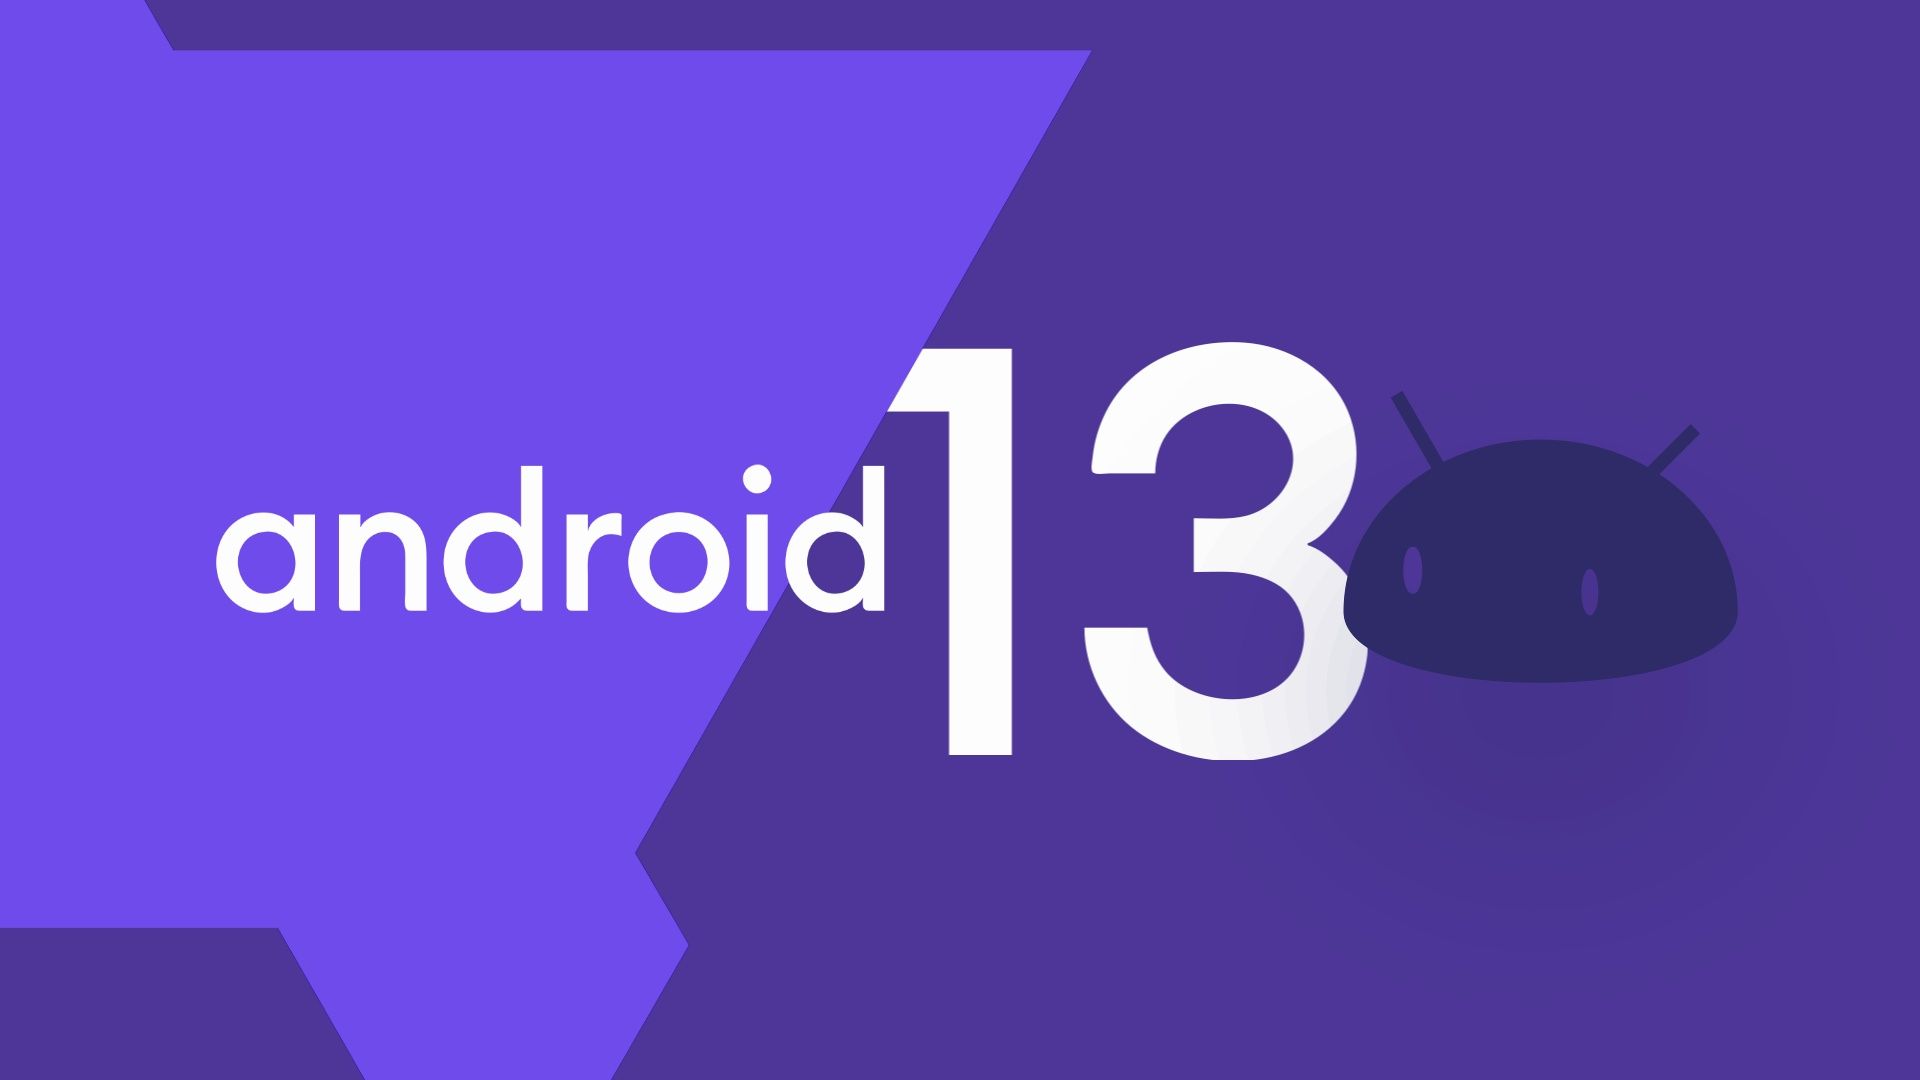 Android 13 is now the most popular version of this operating system after a year of its release